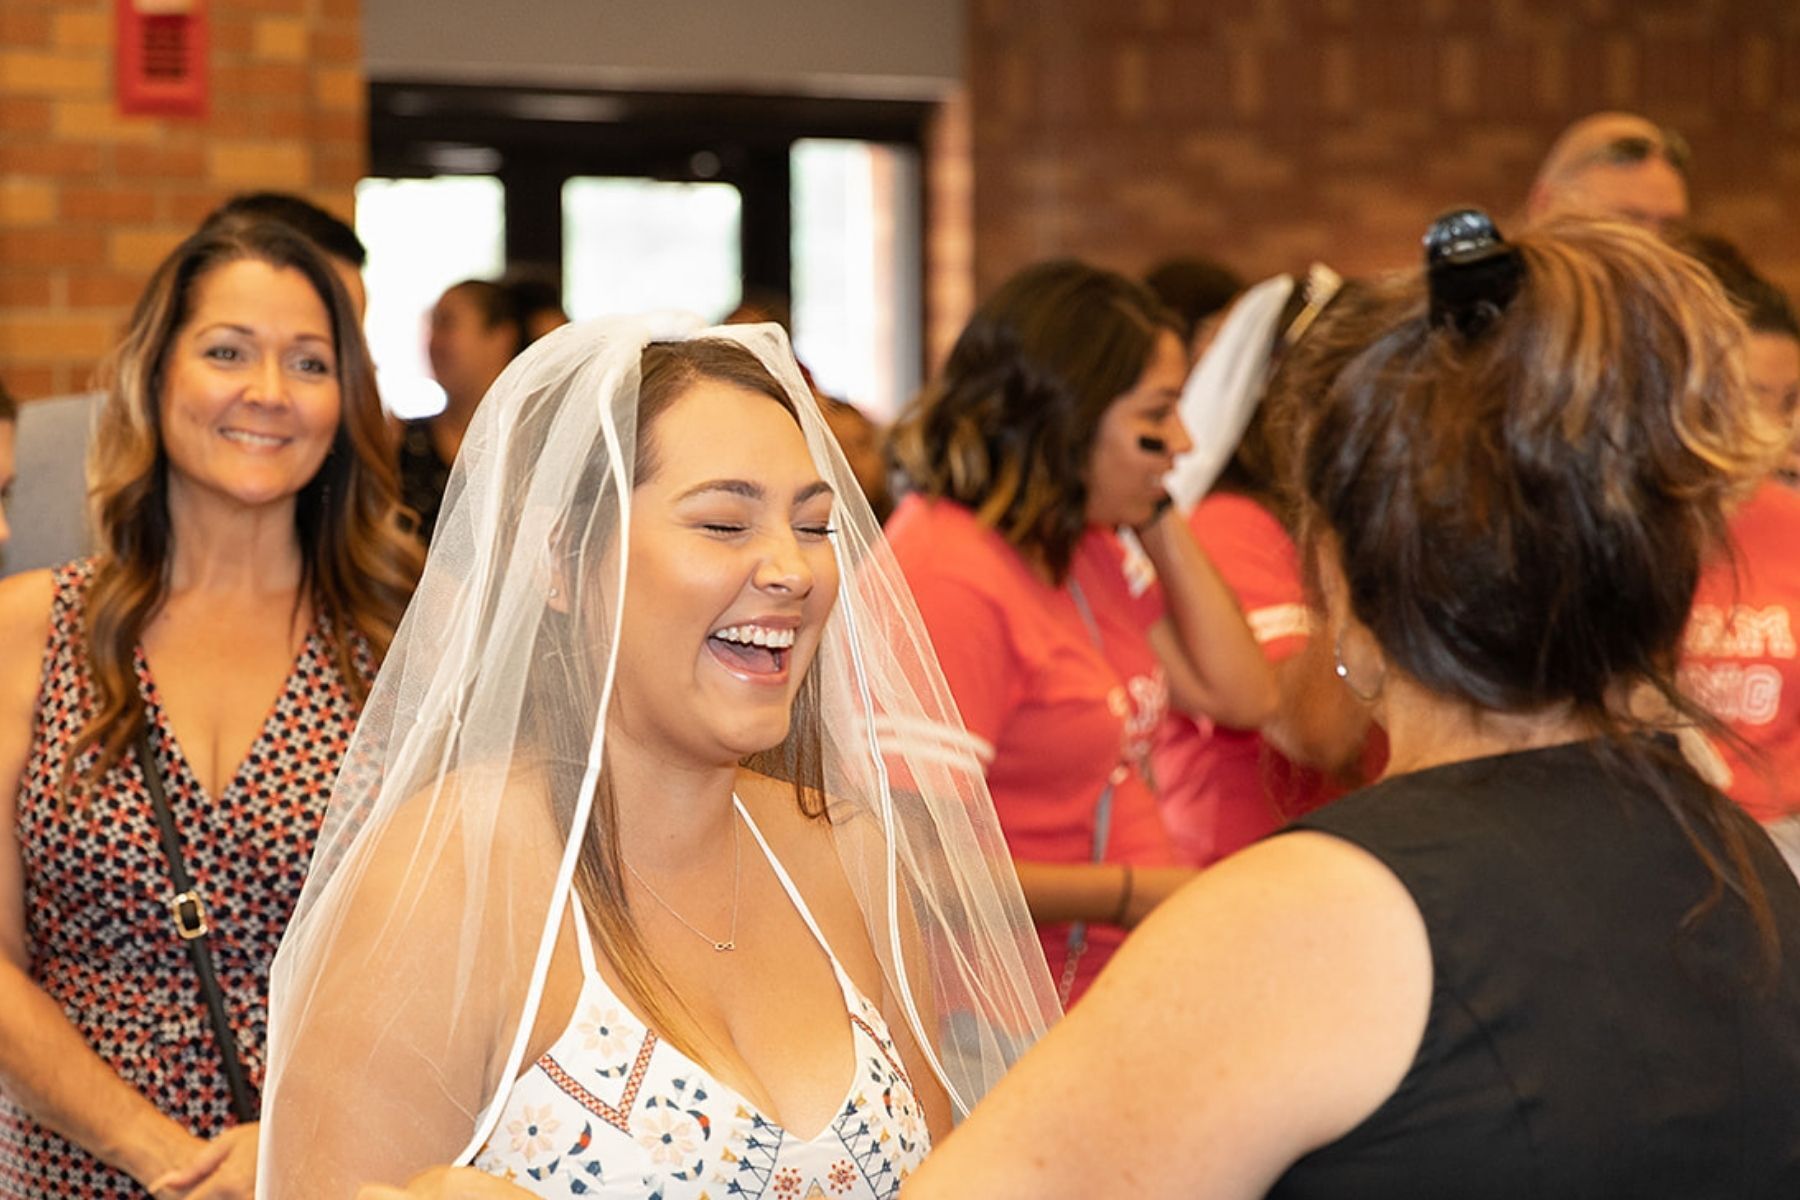 sacramento bride with veil laughing with another woman